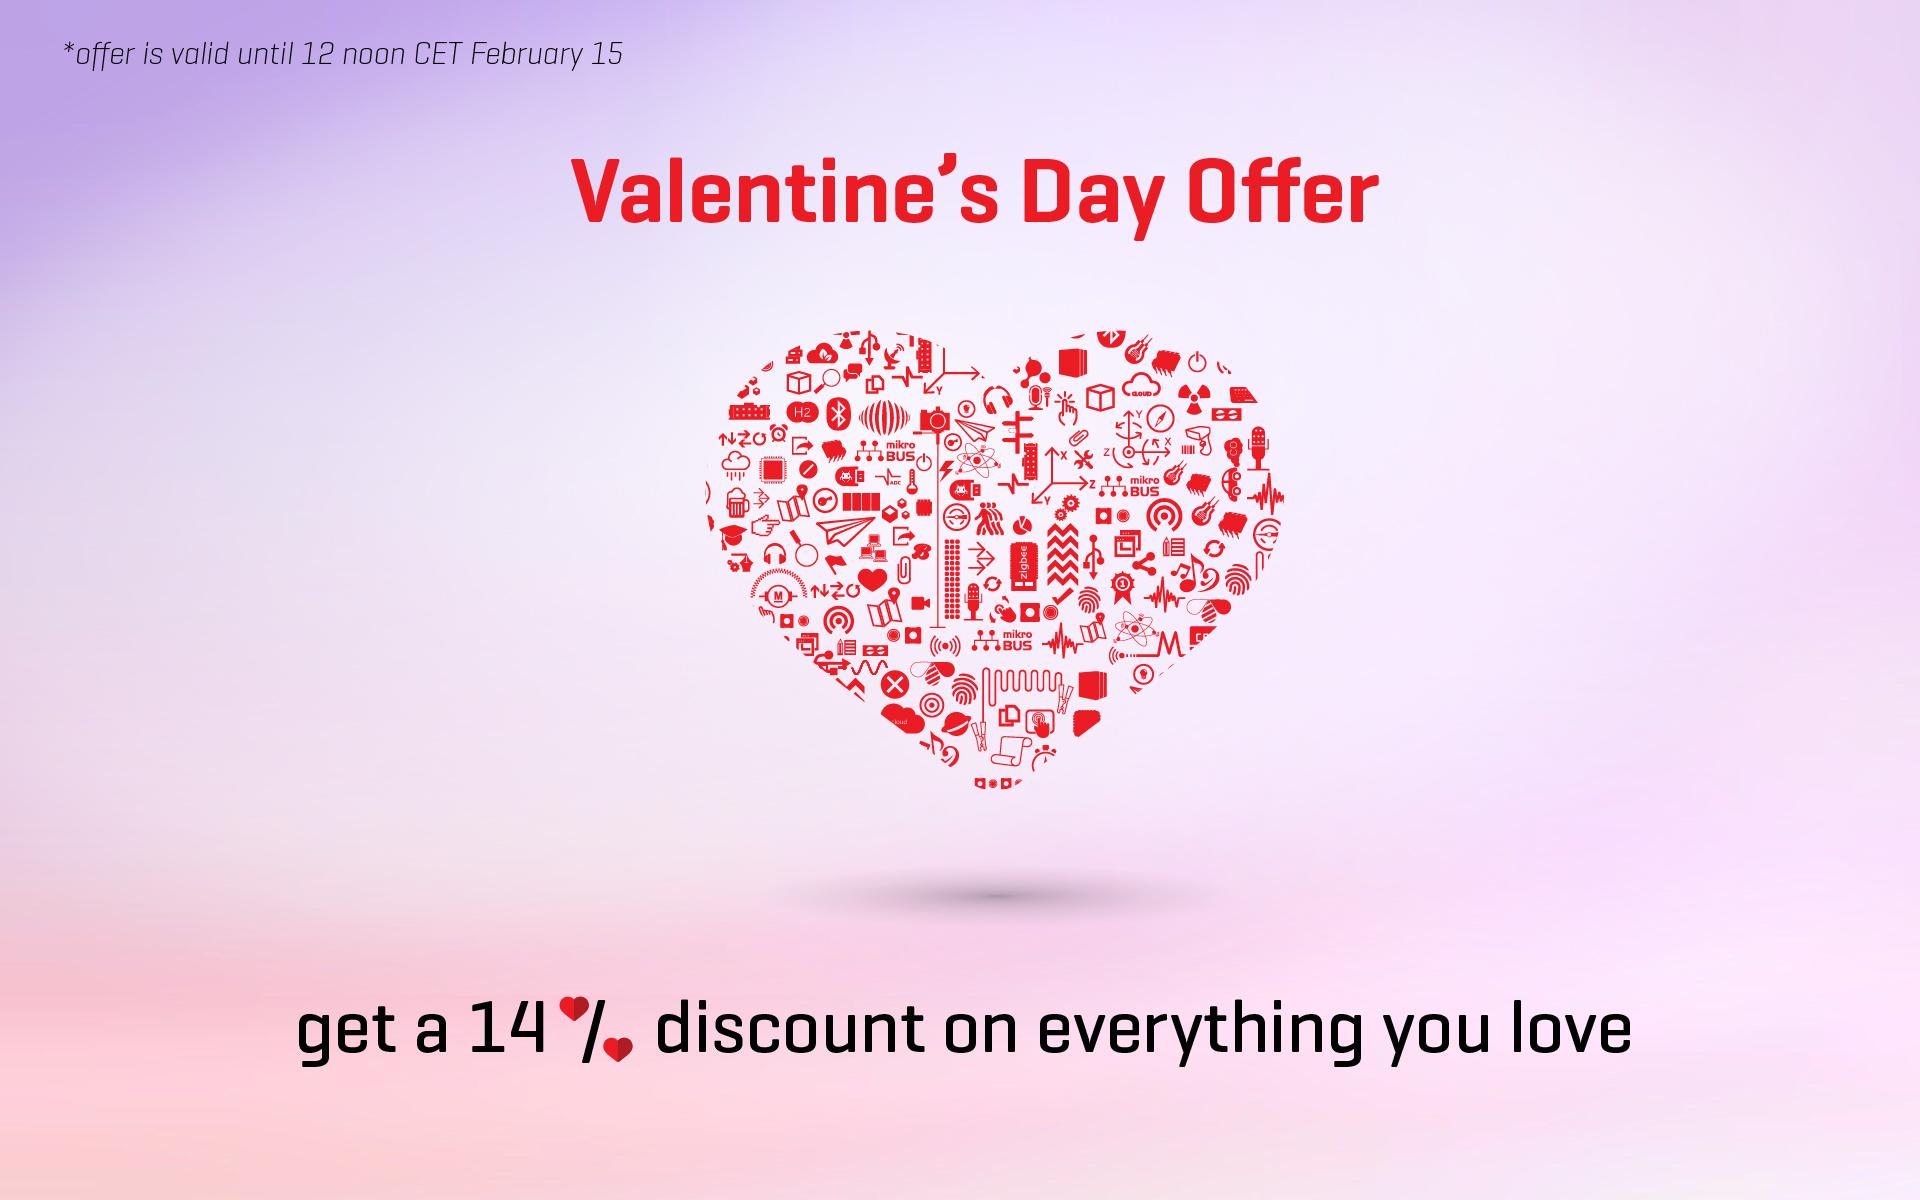 14% discount for our Valentine's day offer